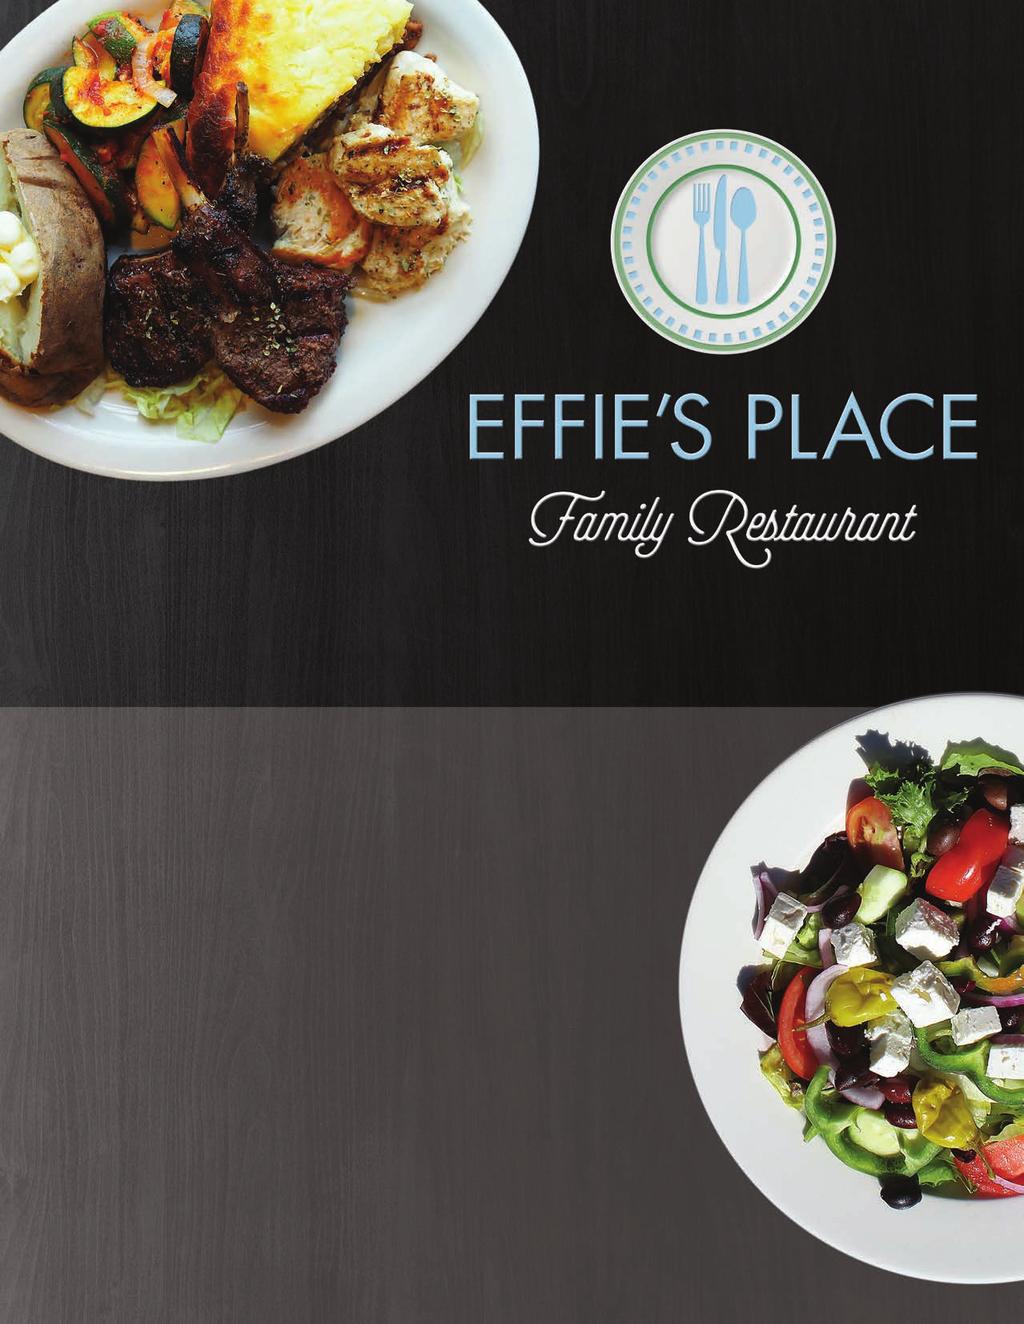 91 Park Road West Hartford, CT 06119 www.effiesplace.net Welcome to Effie s Place Family Restaurant. We know there are many dining choices - so thank you for choosing us!